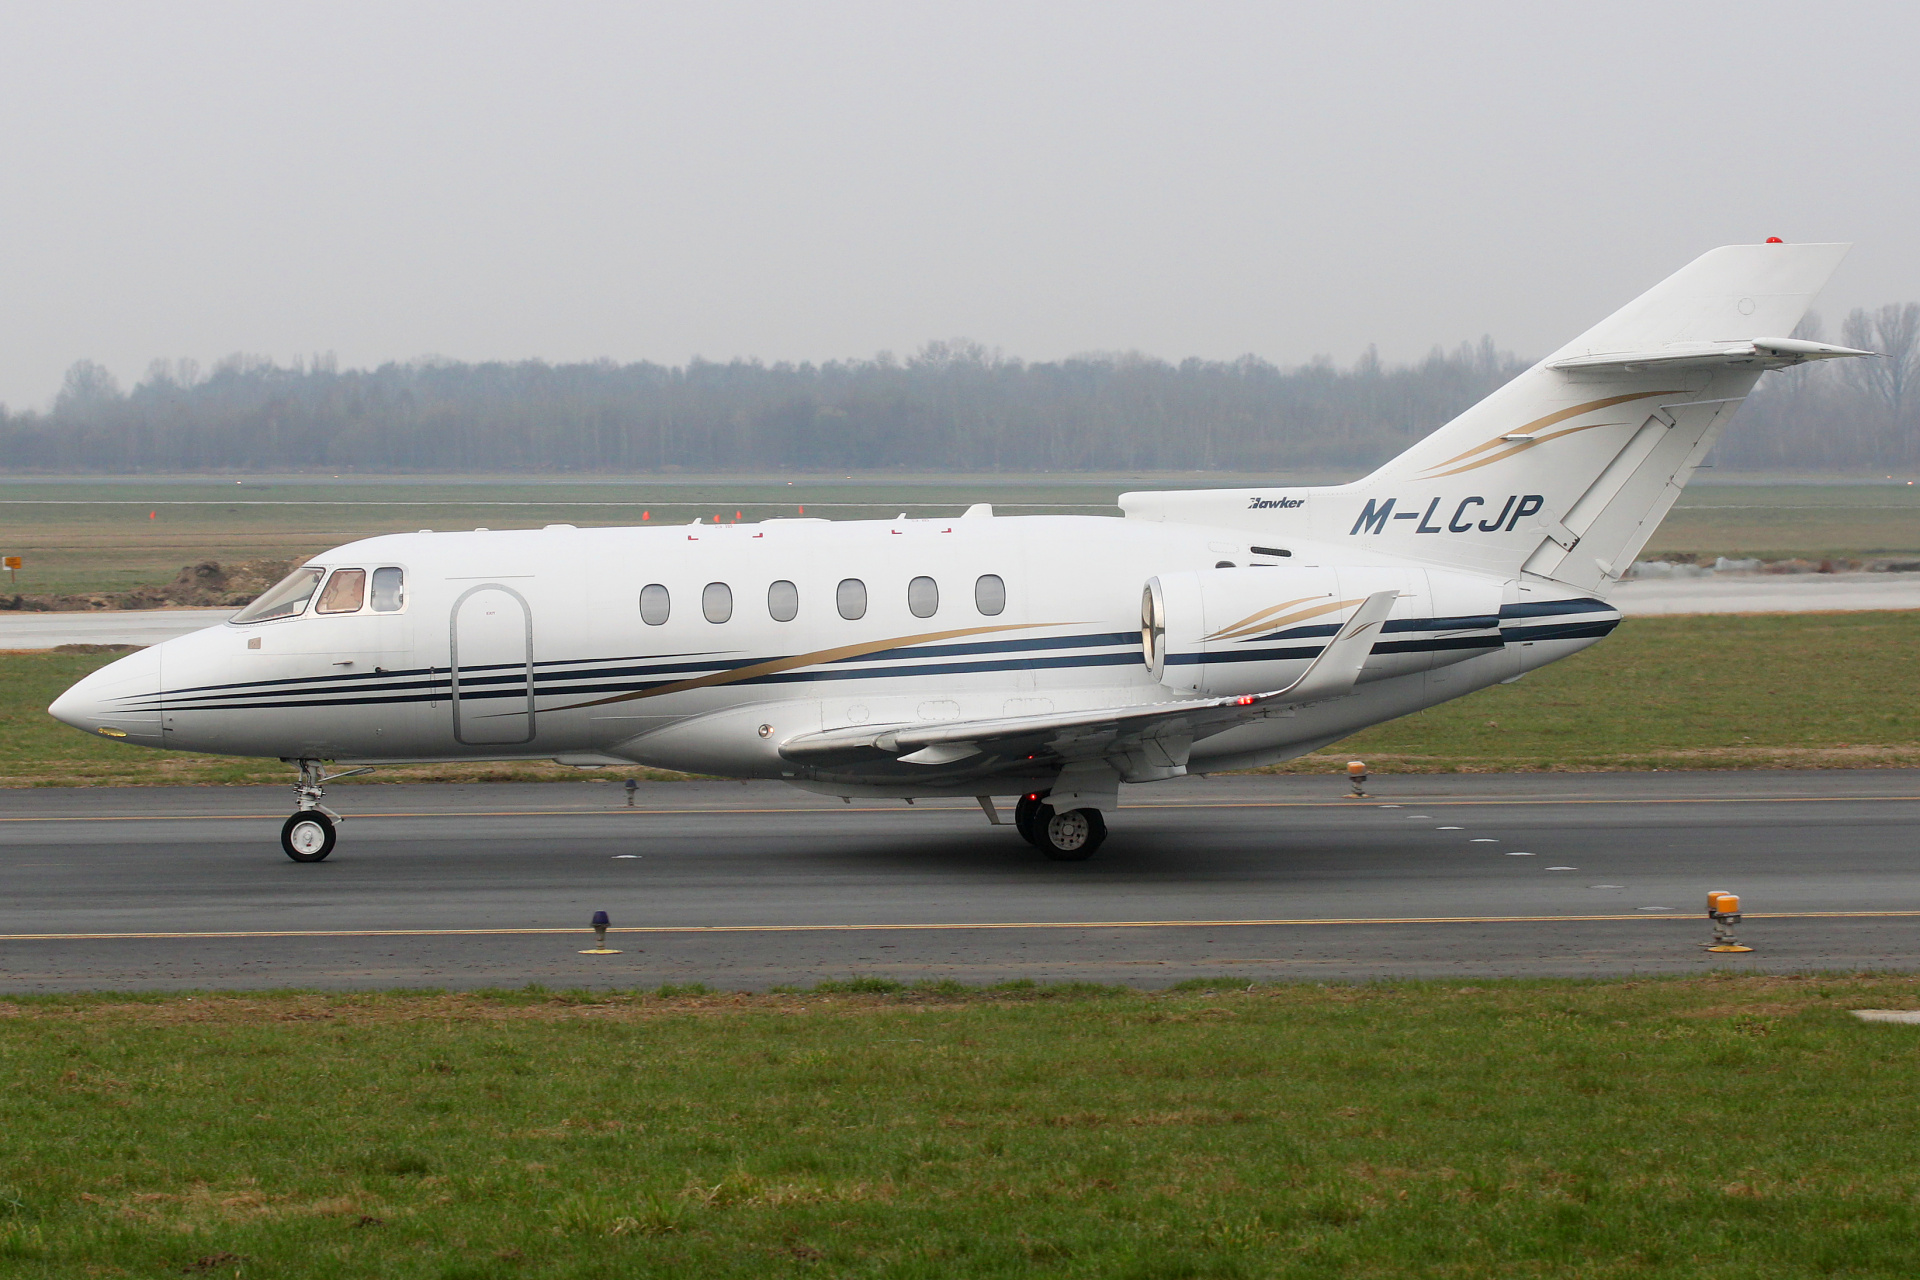 M-LCJP, LC Corp (Aircraft » EPWA Spotting » BAe 125 and revisions » Raytheon Hawker 900XP)